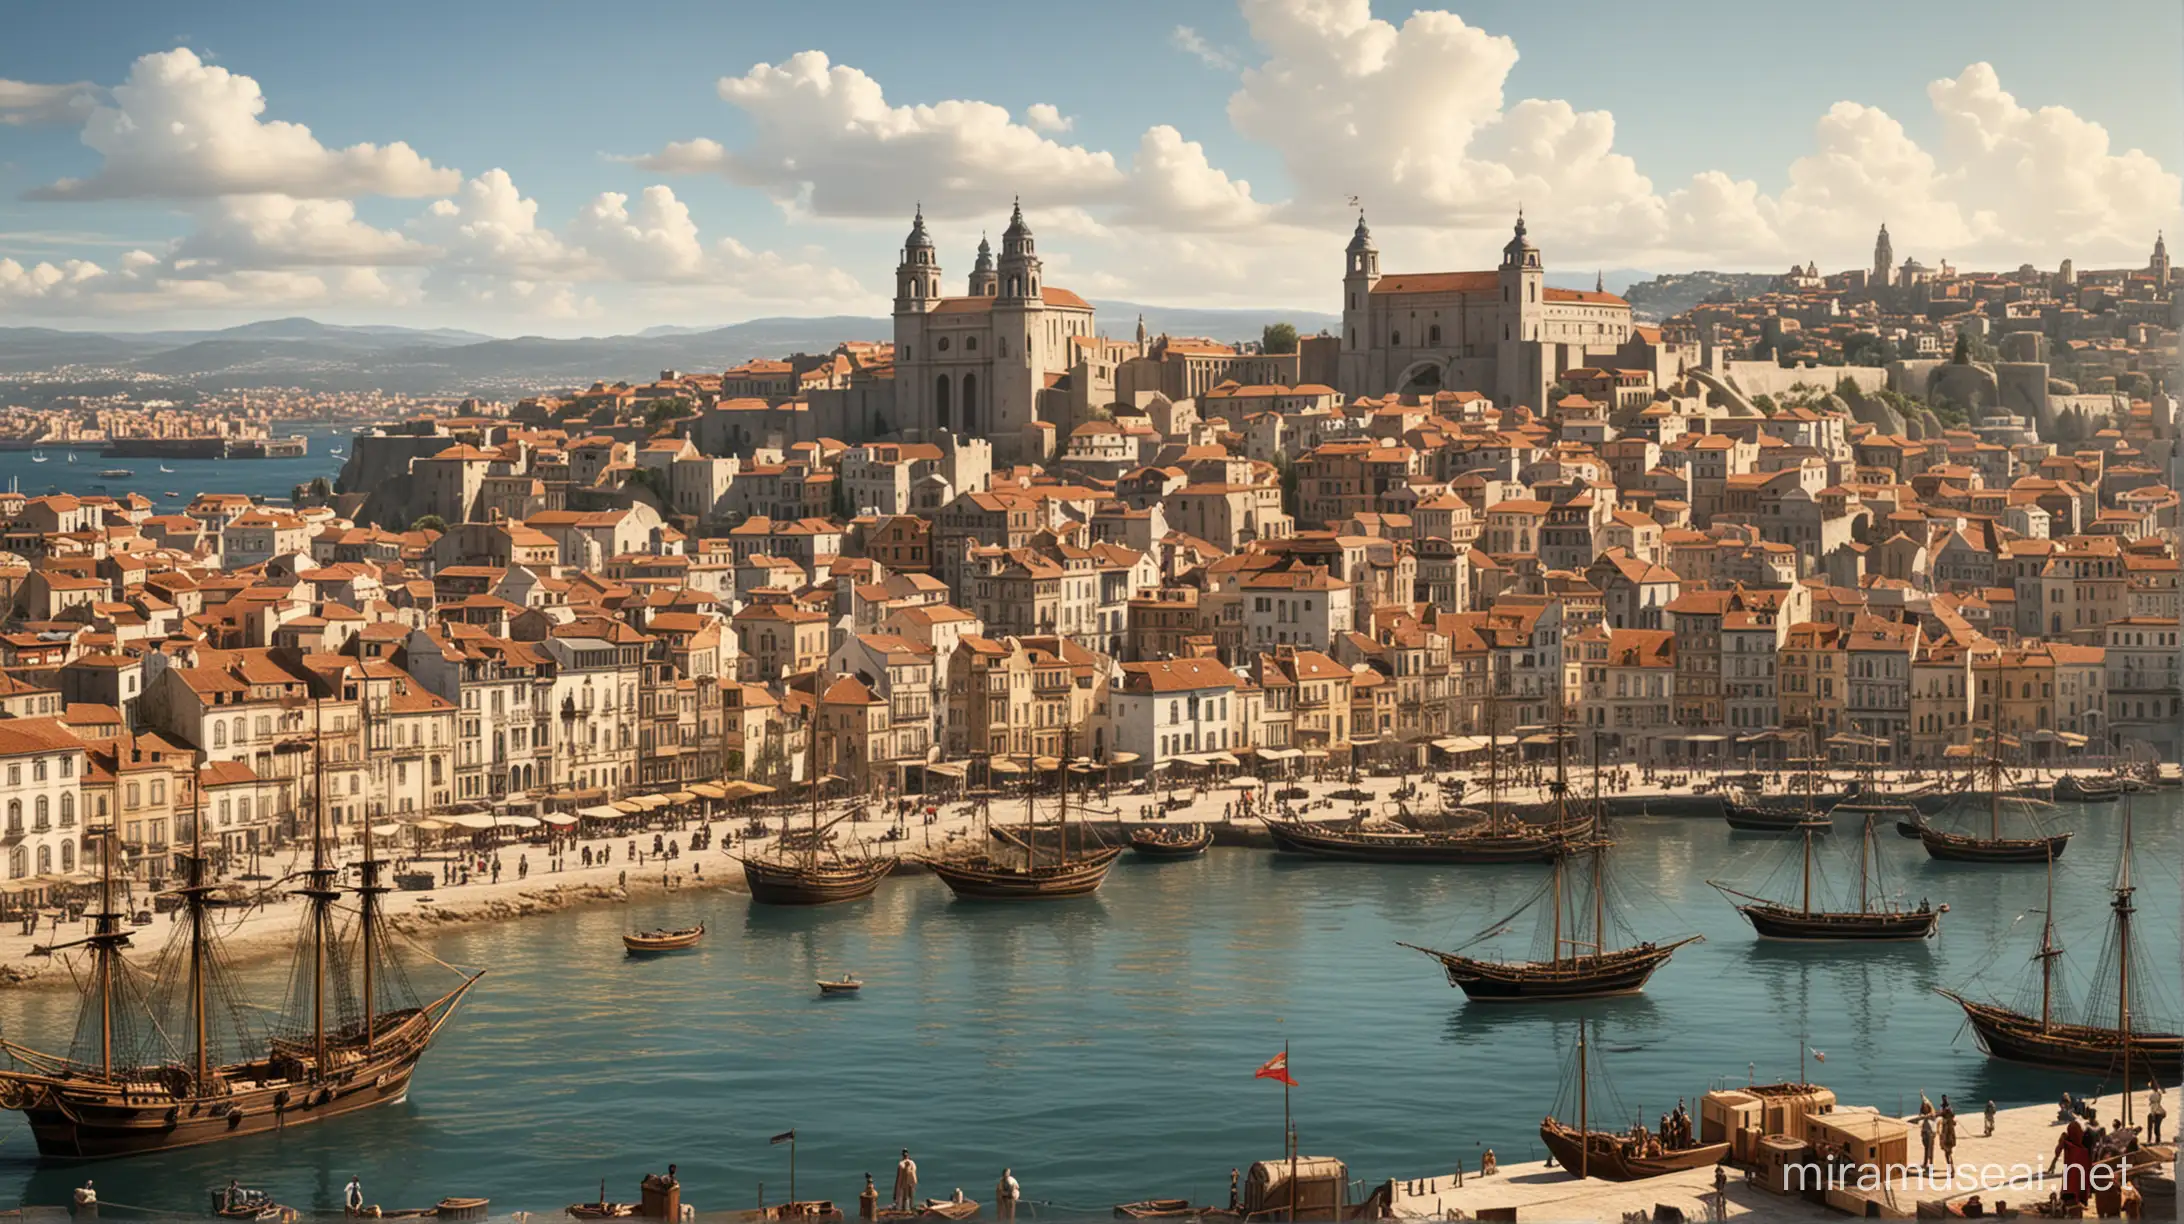 Royale Spanish City Port in the 1700s Bustling Maritime Scene with Ships and Architecture